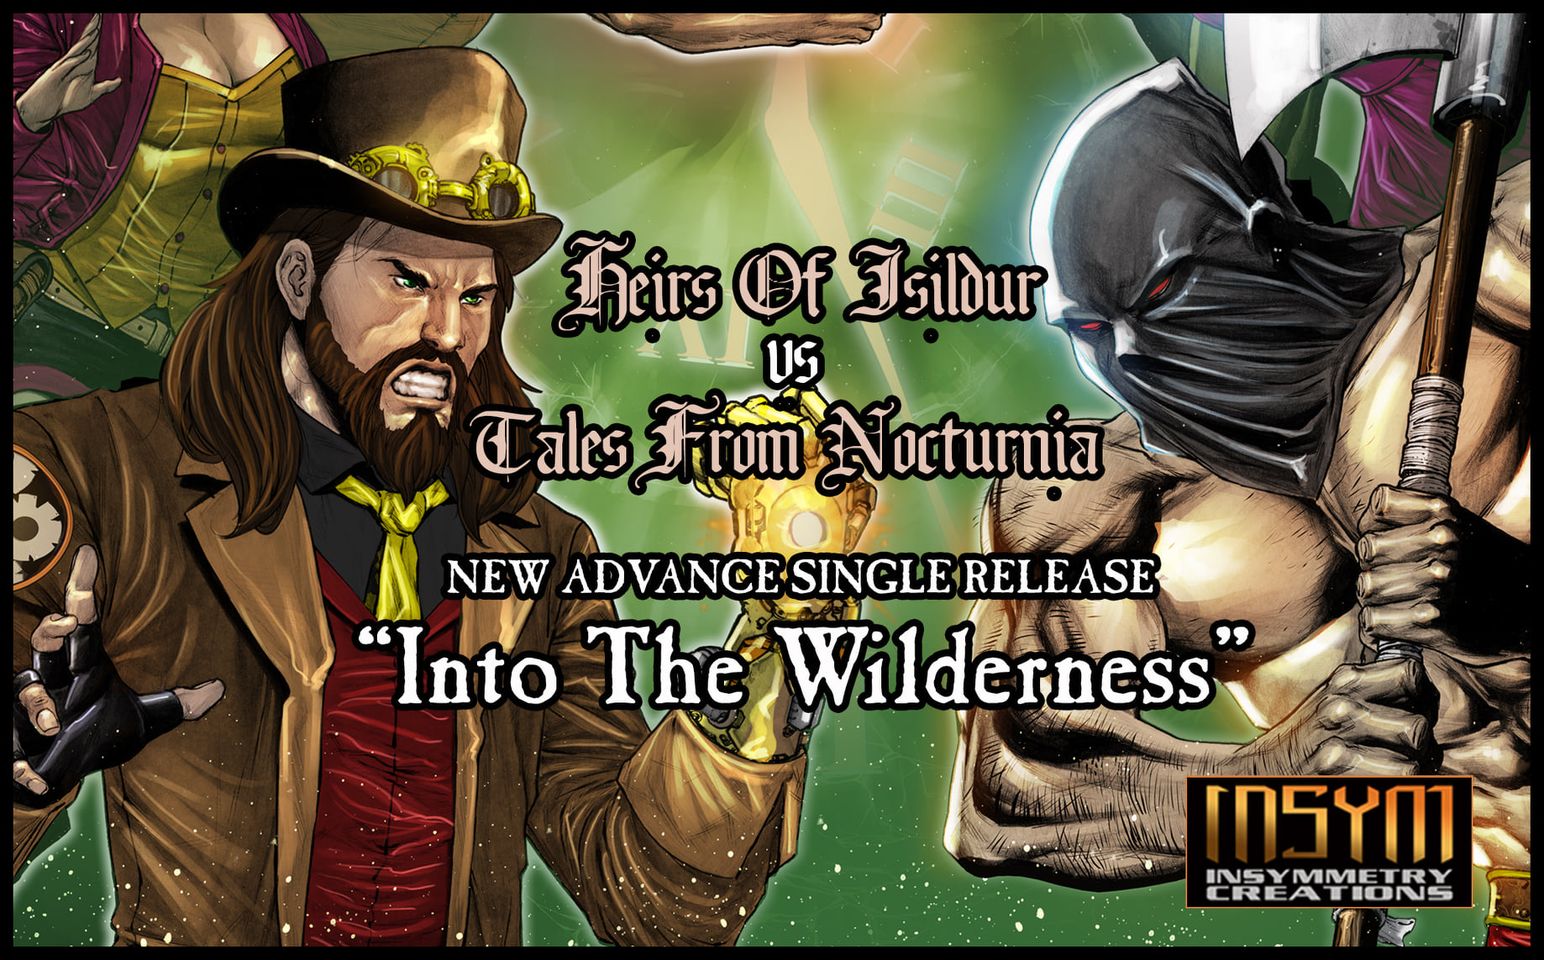 Heirs of isildur, tales from nocturnia, music, steampunk, matt knowles, steph cannon